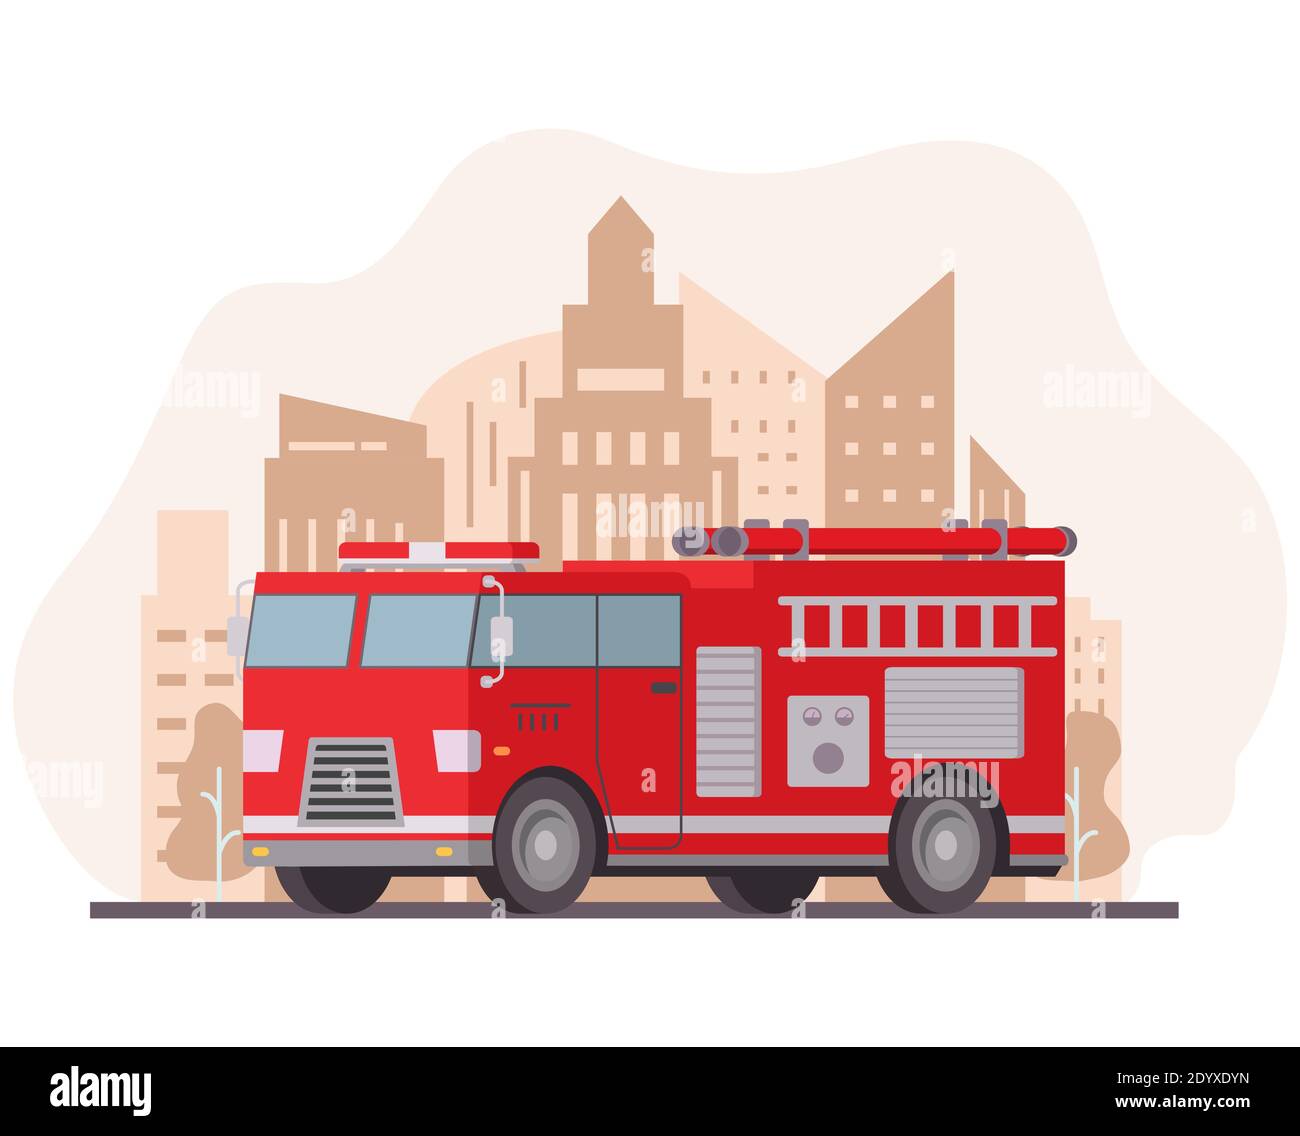 Fire engine.Emergency service red vehicle.Red fire truck with ladder. Stock Vector